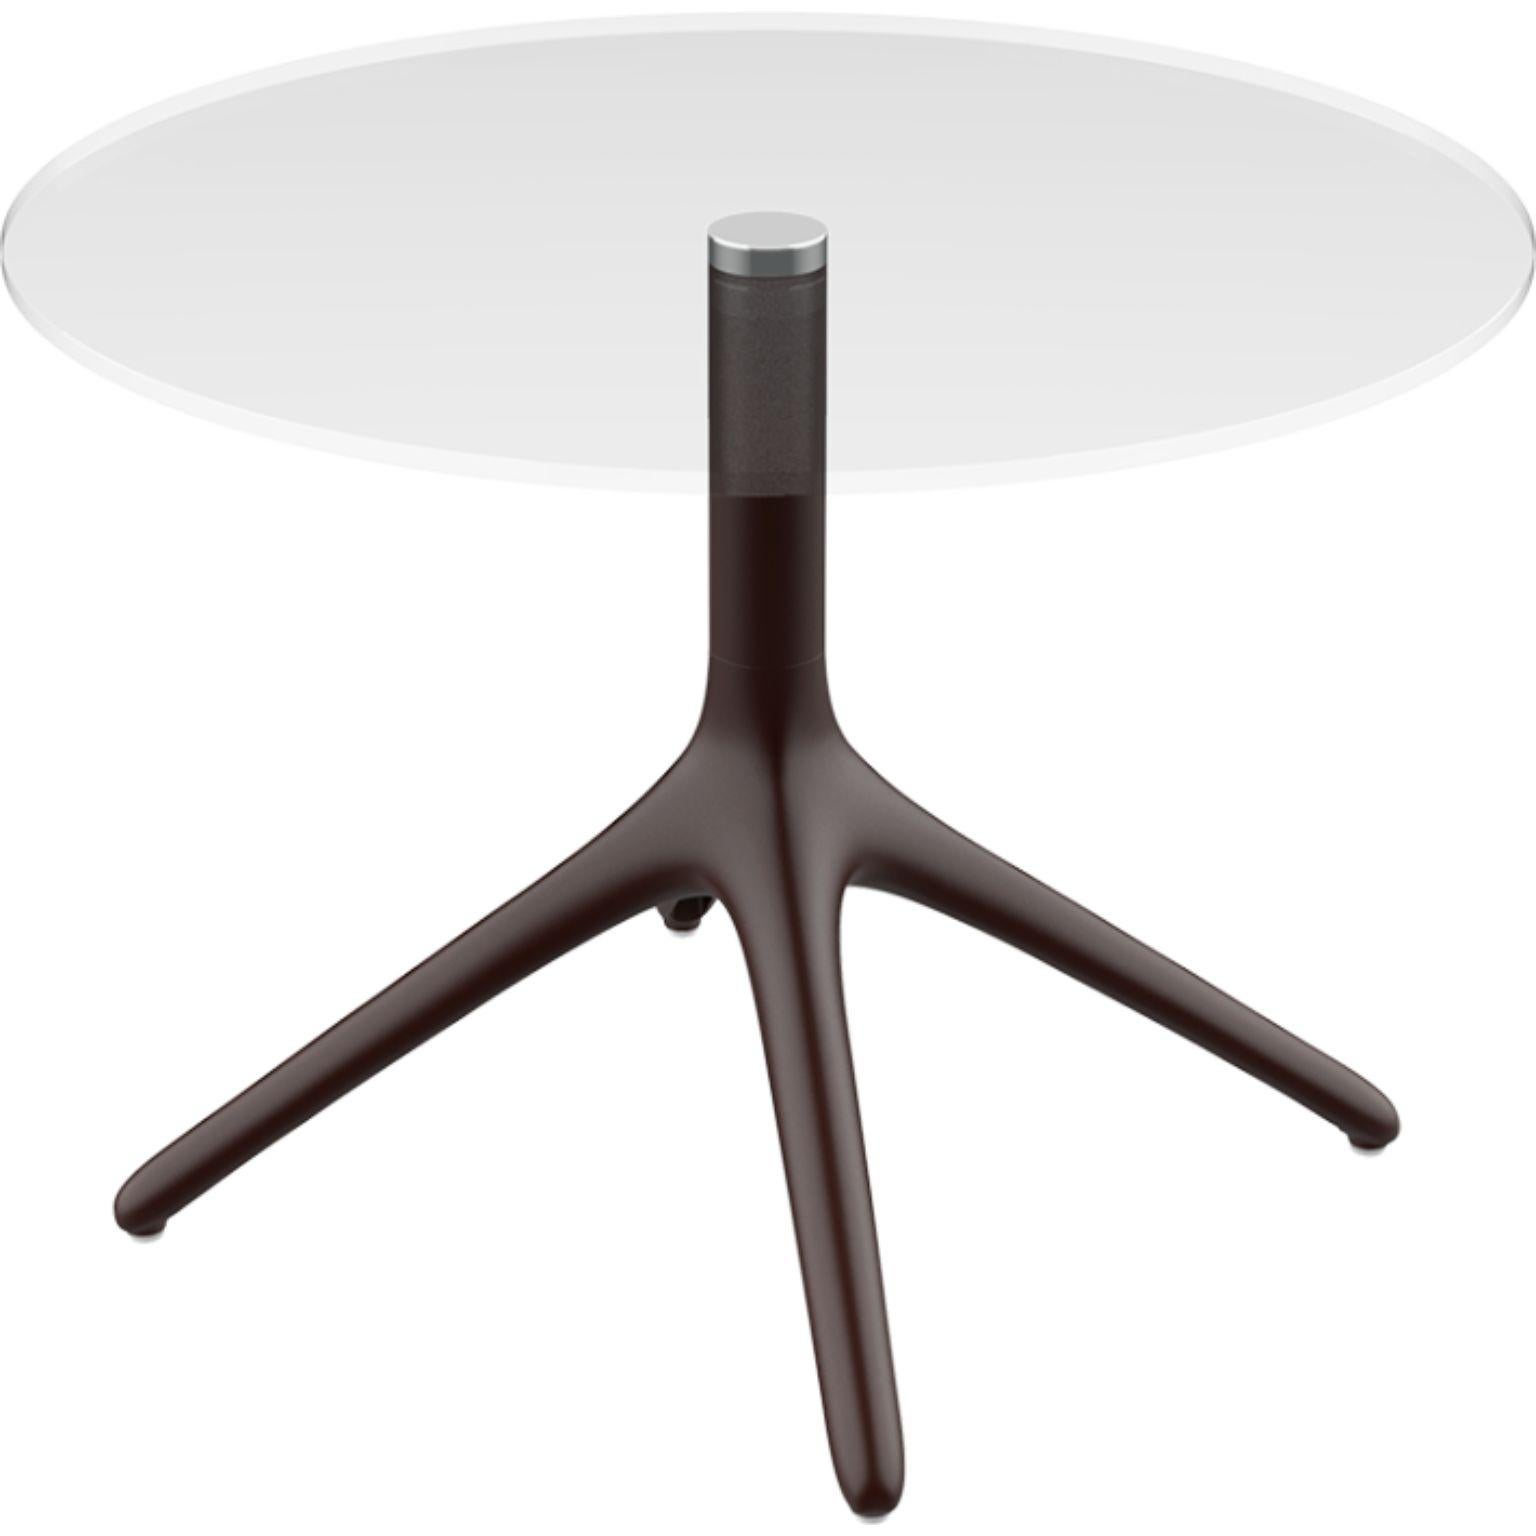 Uni chocolate table 50 by Mowee.
Dimensions: D45.5 x H50 cm.
Material: Aluminium, tempered glass.
Weight: 5 kg
Also Available in different colours and finishes. Collapsable version available. 

A table designed to be as versatile as possible